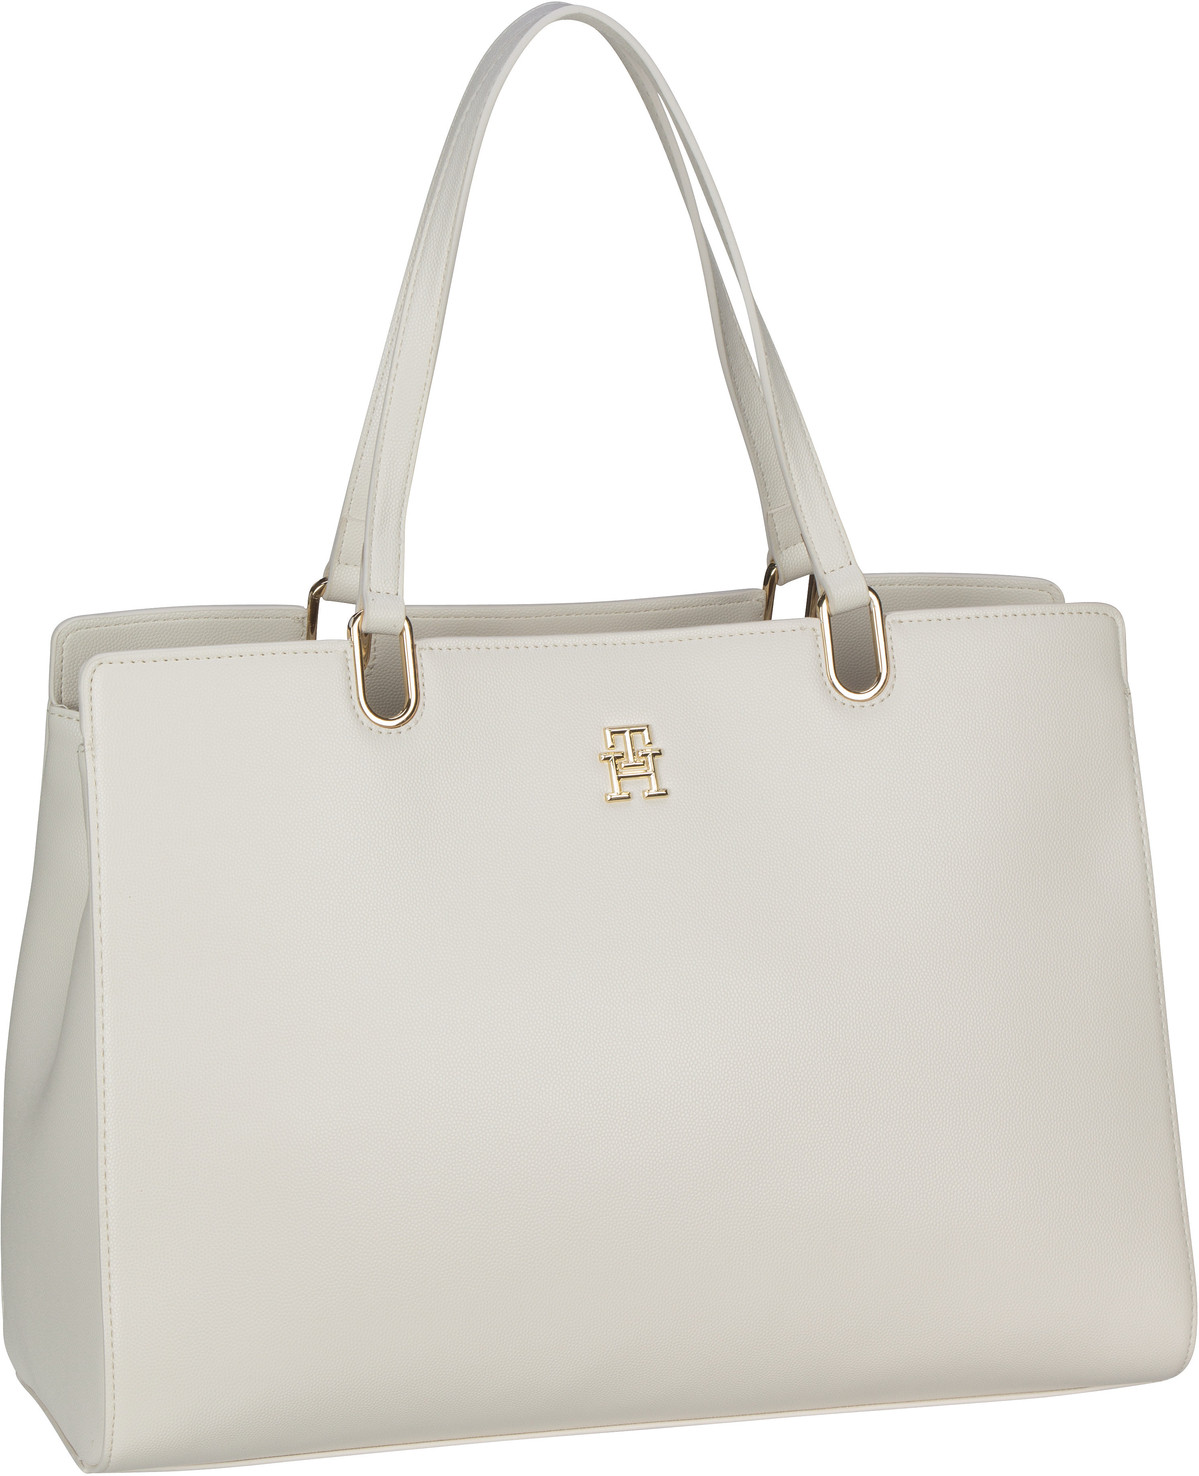 Tommy Hilfiger TH Timeless Satchel SP23 - Weathered White